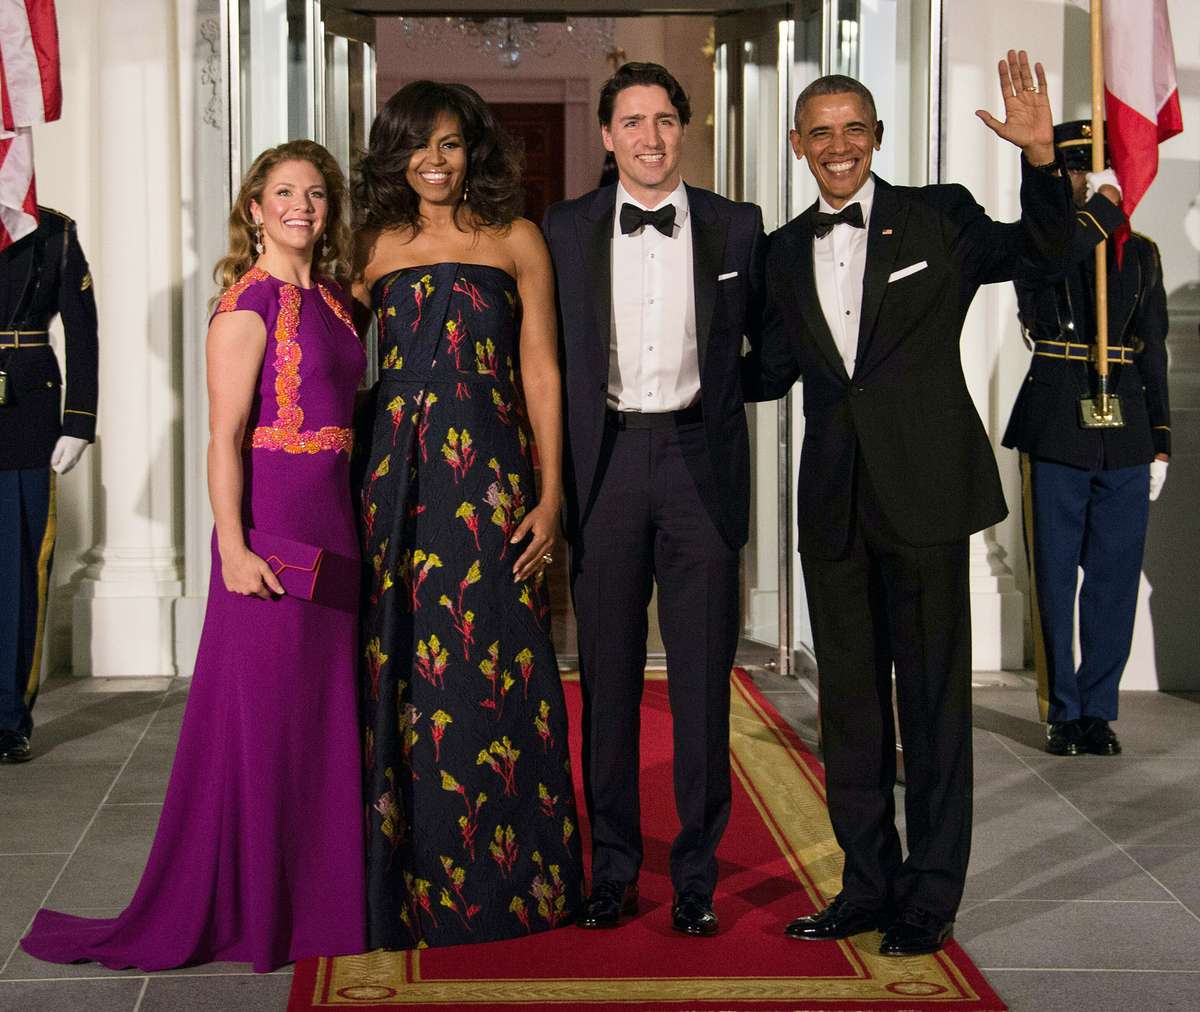 US President Barack Obama (R), Canadian Prime Minister Justin Trudeau (2nd R) and their wives Michelle Obama (2nd L) and Sophie Gregoire Trudeau (L) pose u[pon the Trudeau's arrival for a State Dinner in their honor at the White House in Washington, DC, o